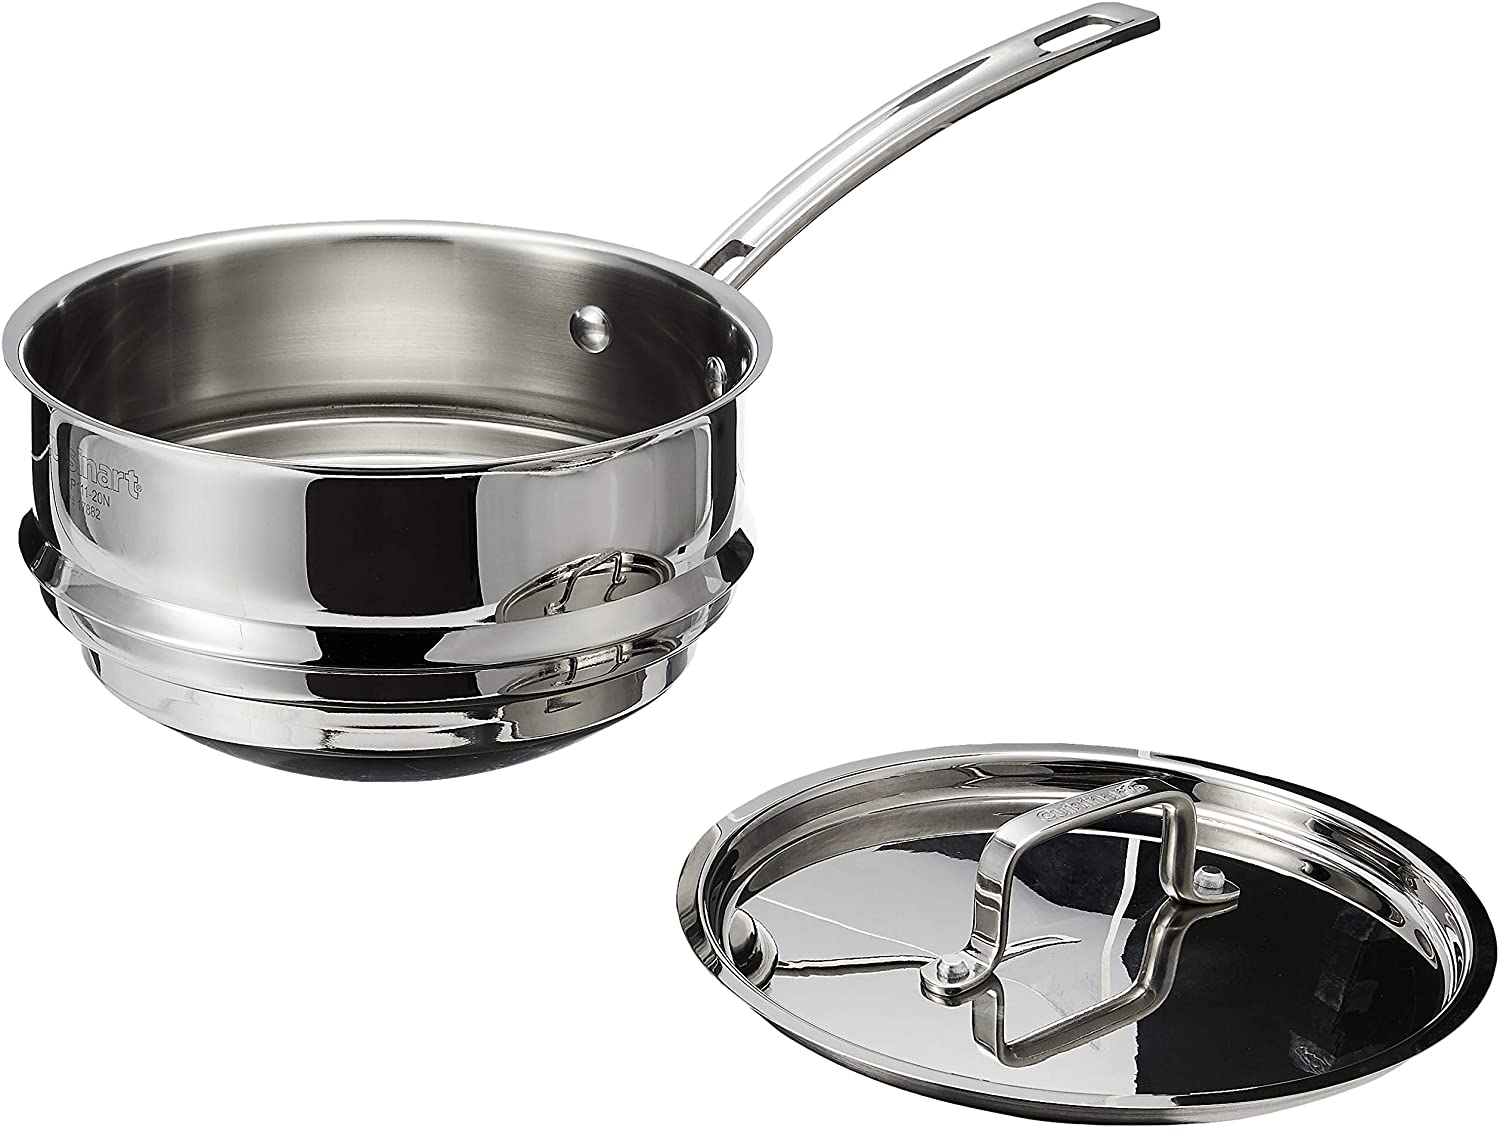 Cuisinart MCP111-20N MultiClad Pro Universal Stainless Double Boiler